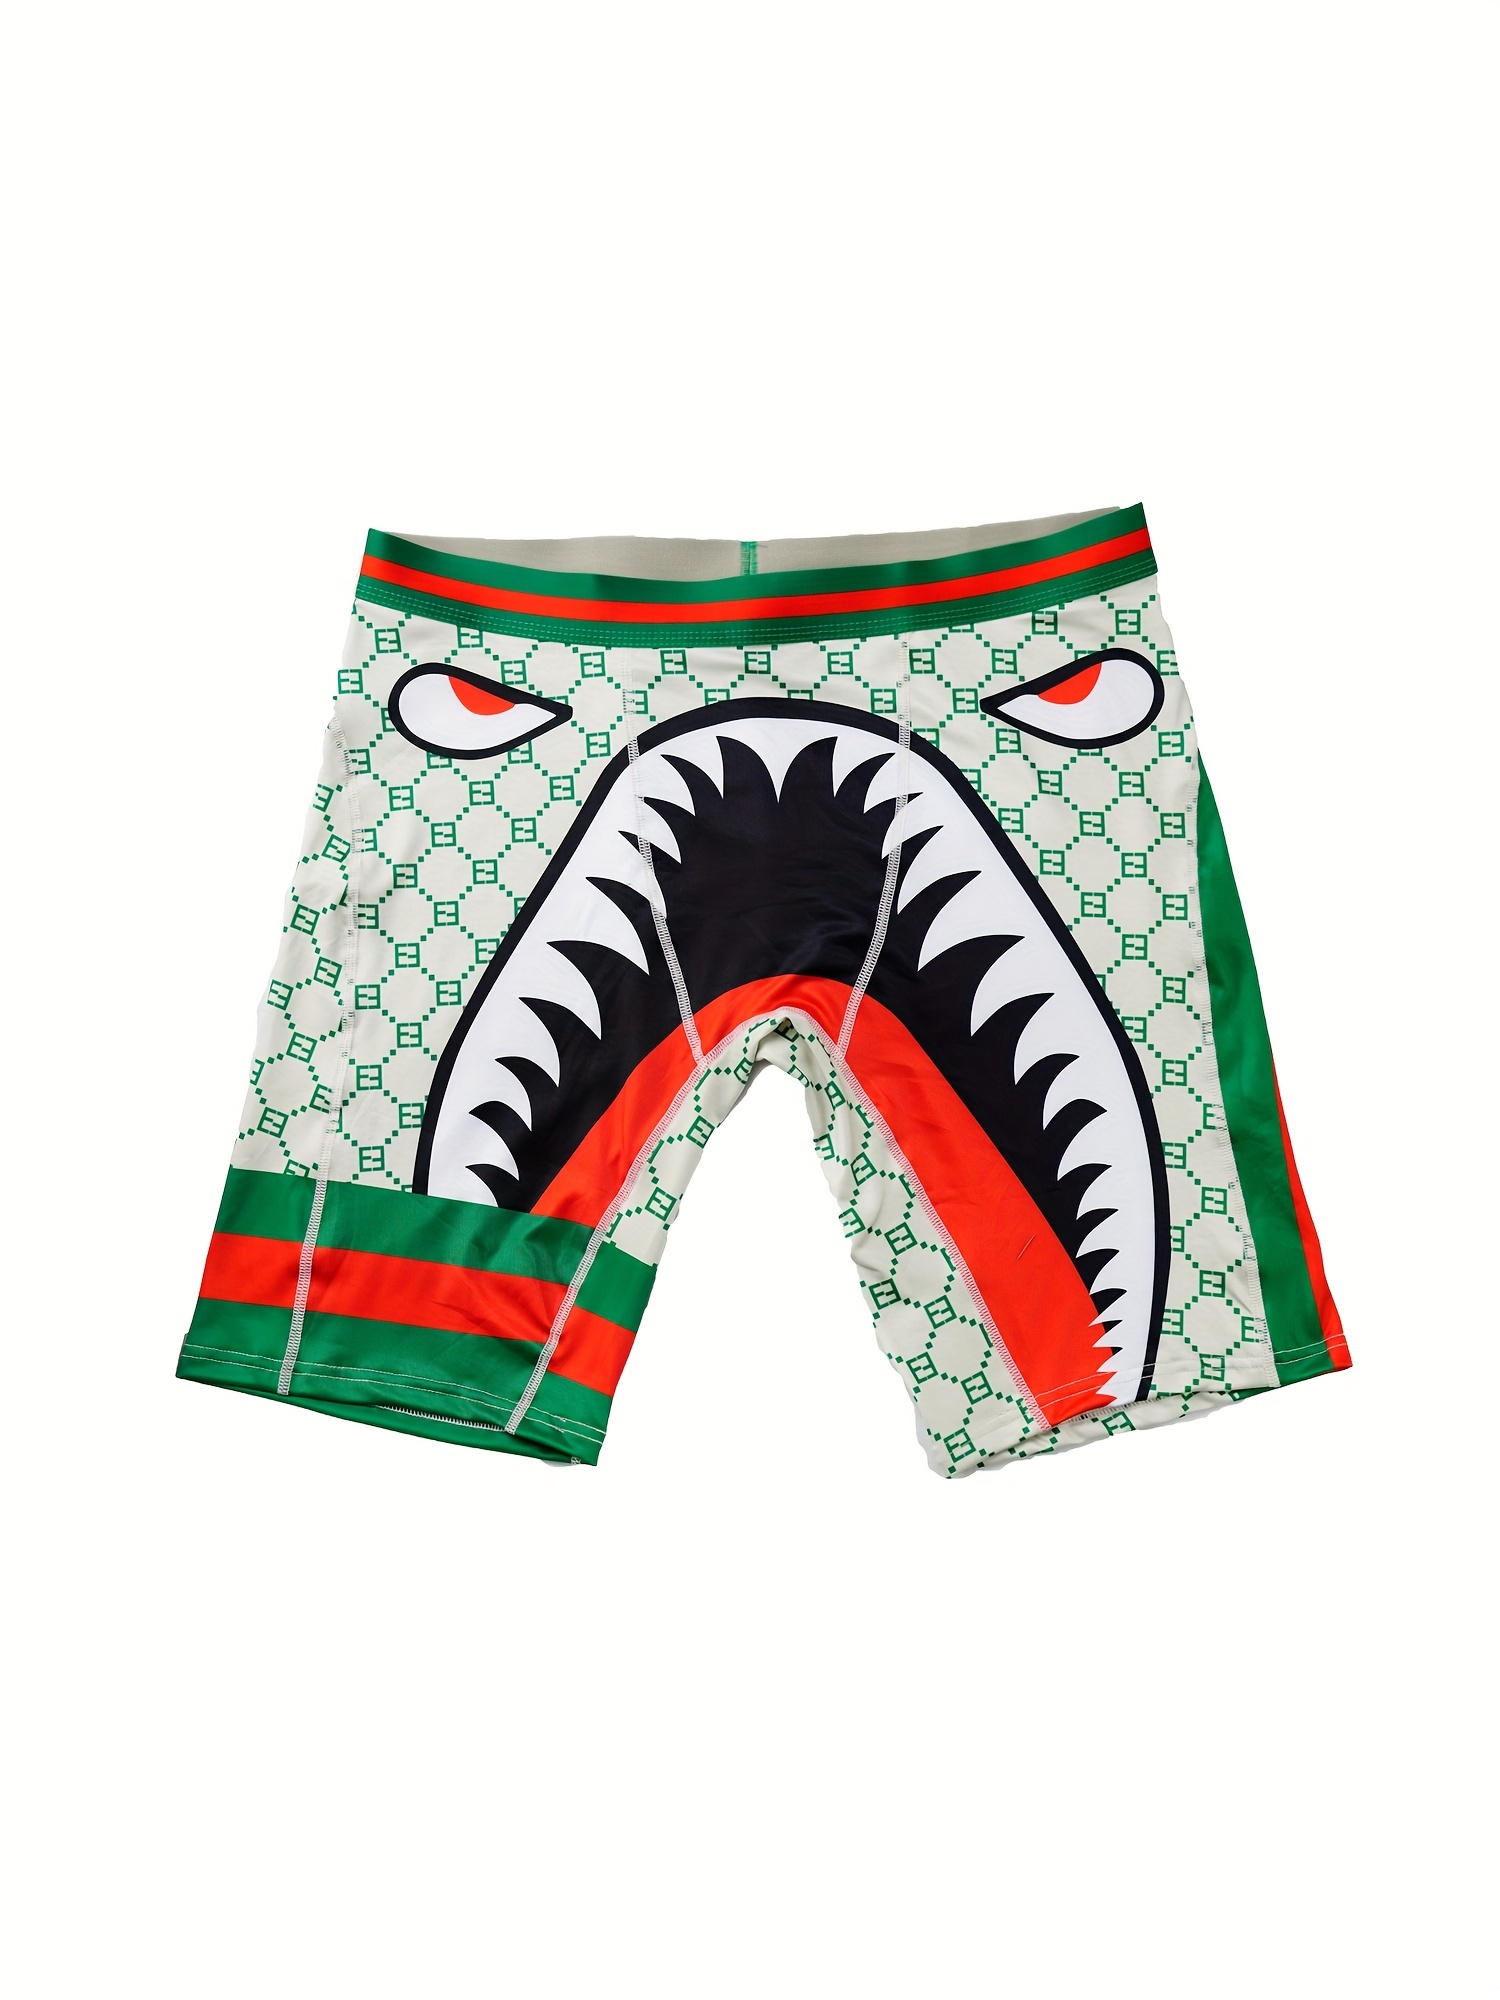 Men's Cotton Novelty Funny Boxer Briefs, Shark Element Comfortable  Breathable Soft Underwear, Don't Miss These Great Deals